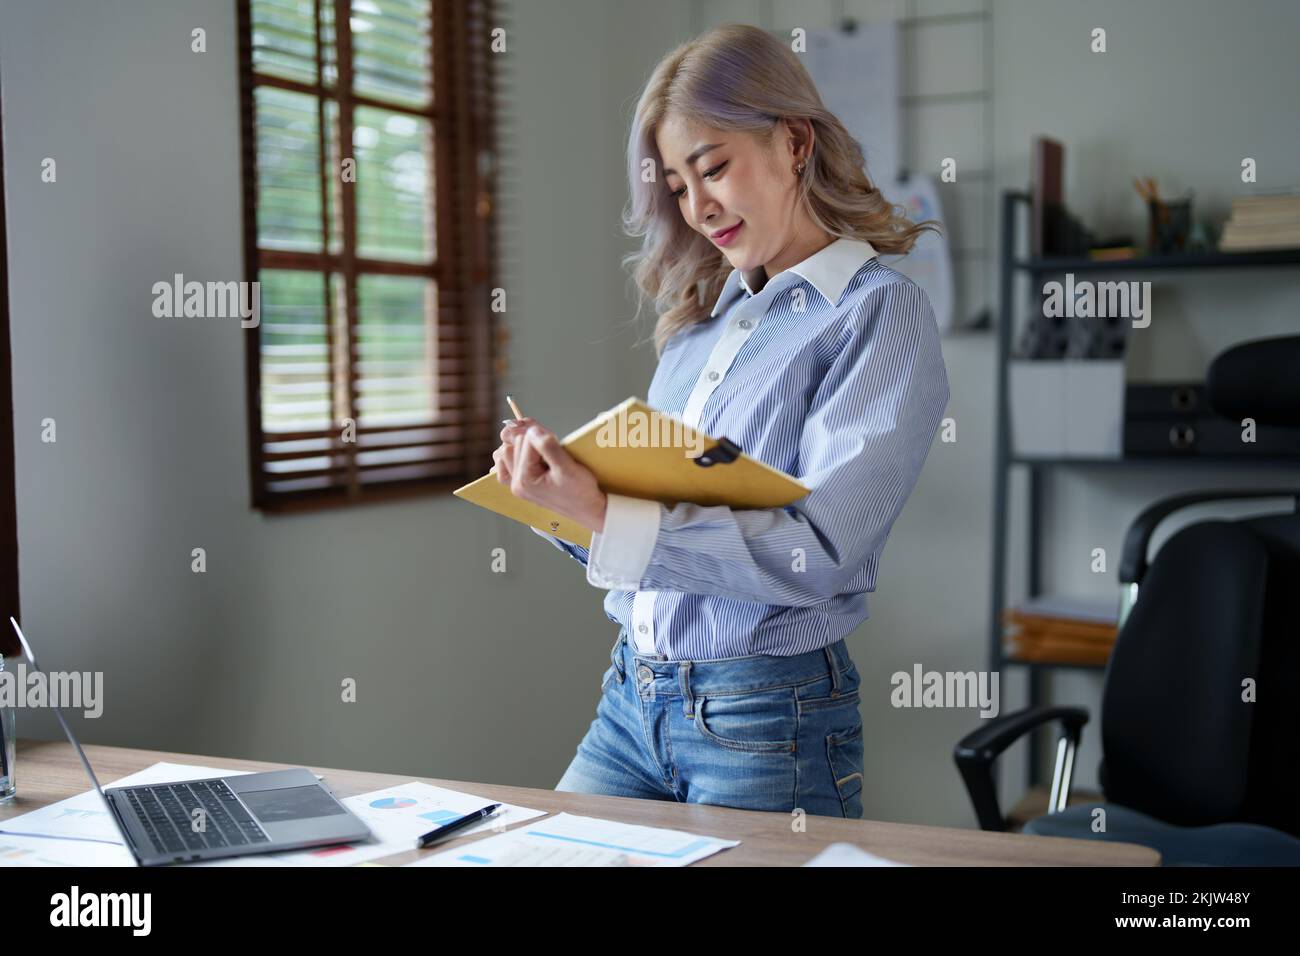 Portrait of a young Asian woman showing a smiling face as she using notebook, computer and financial documents on her desk in the early morning hours Stock Photo